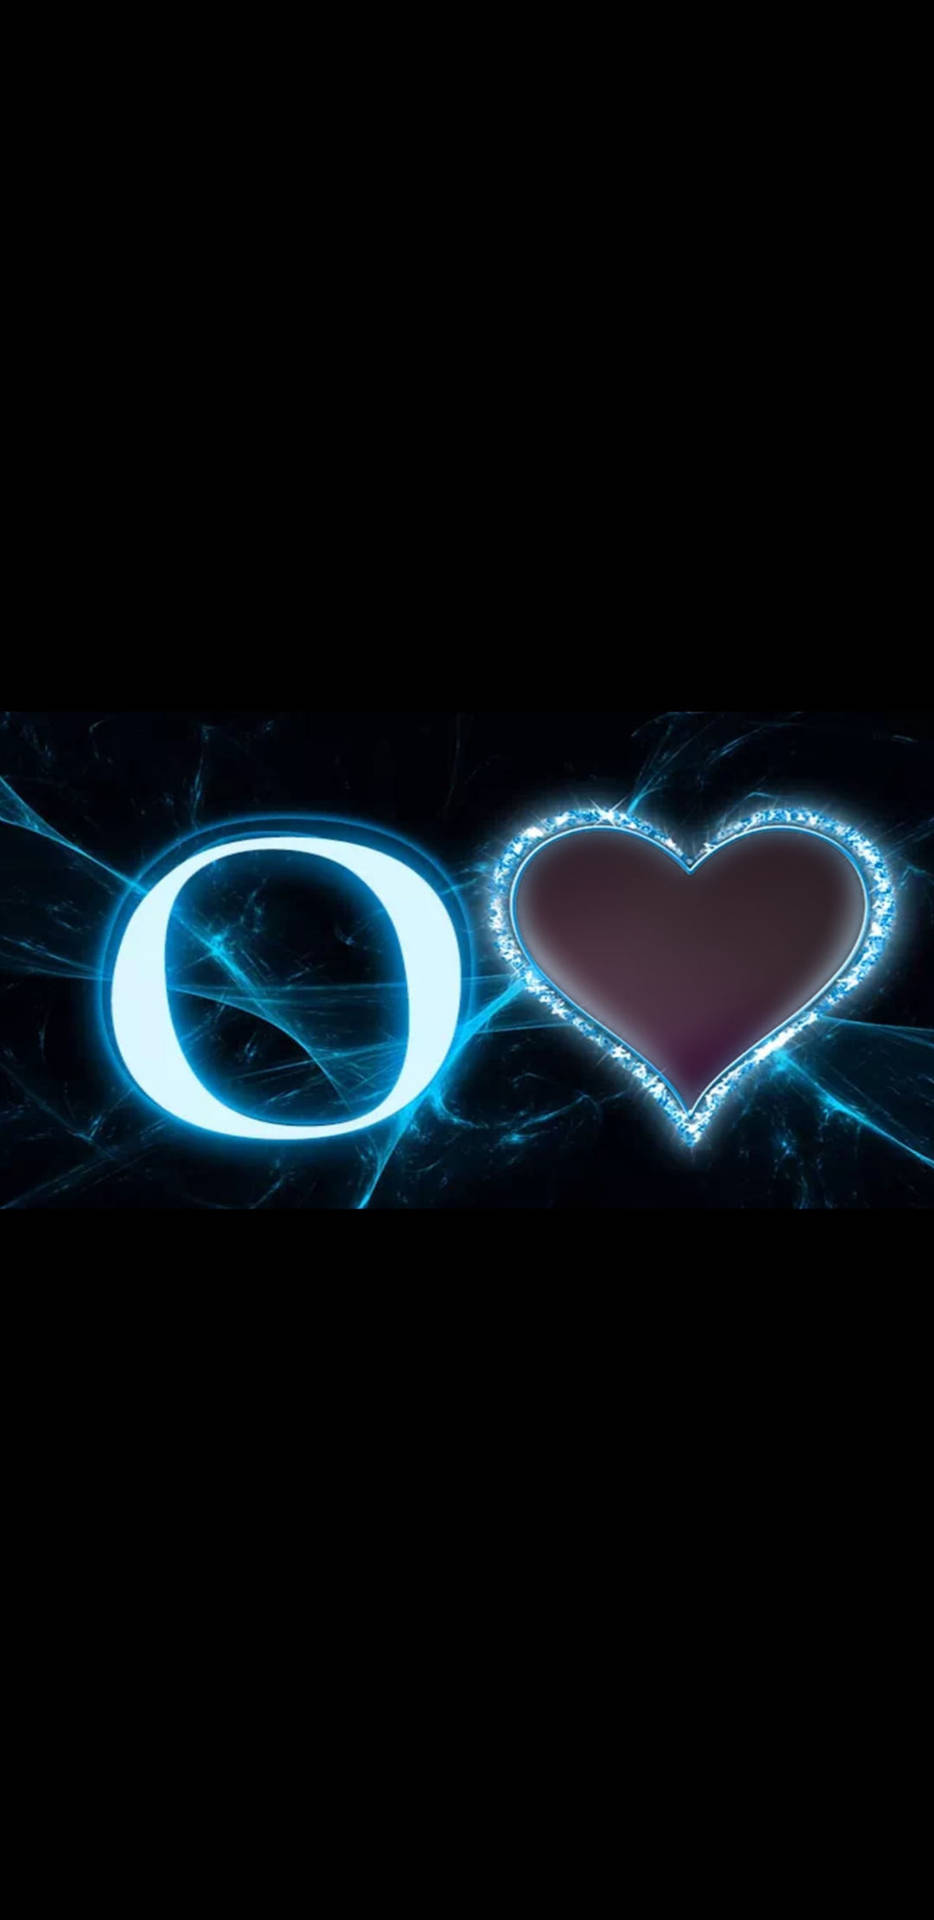 Letter O And Black Heart